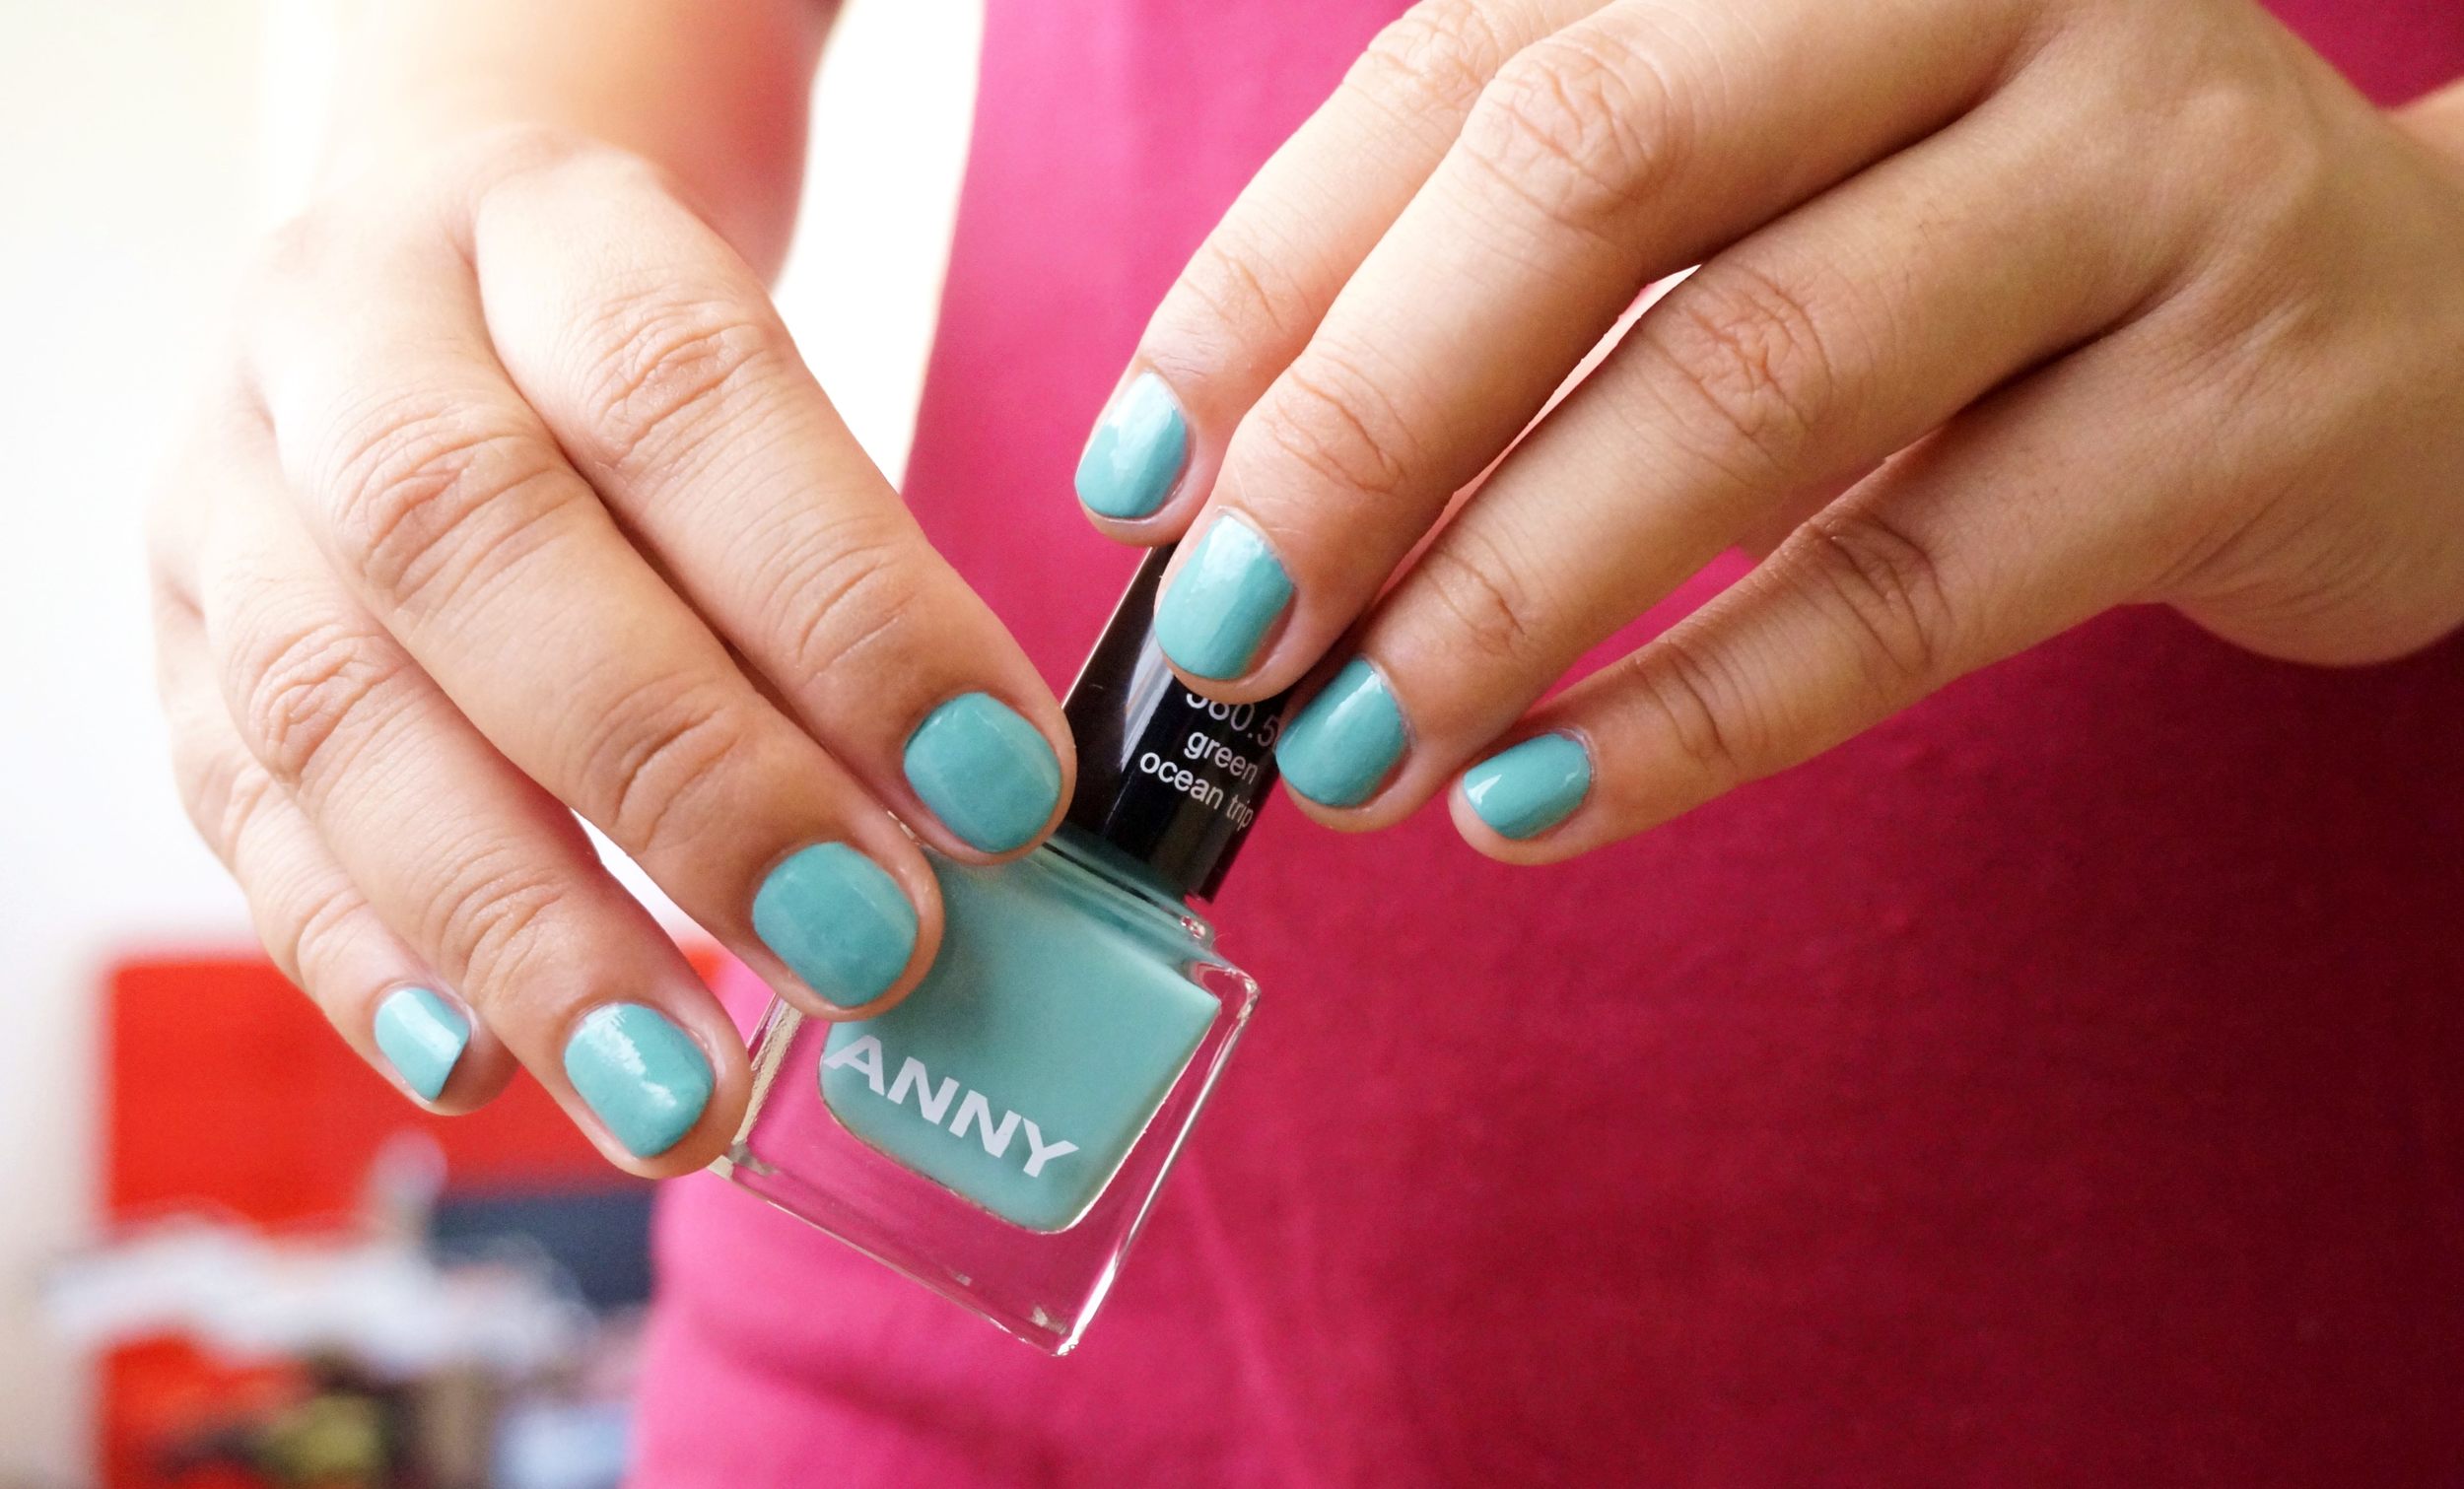 NOTD: Anny Nail Polish in Green Ocean Trip — Project Vanity